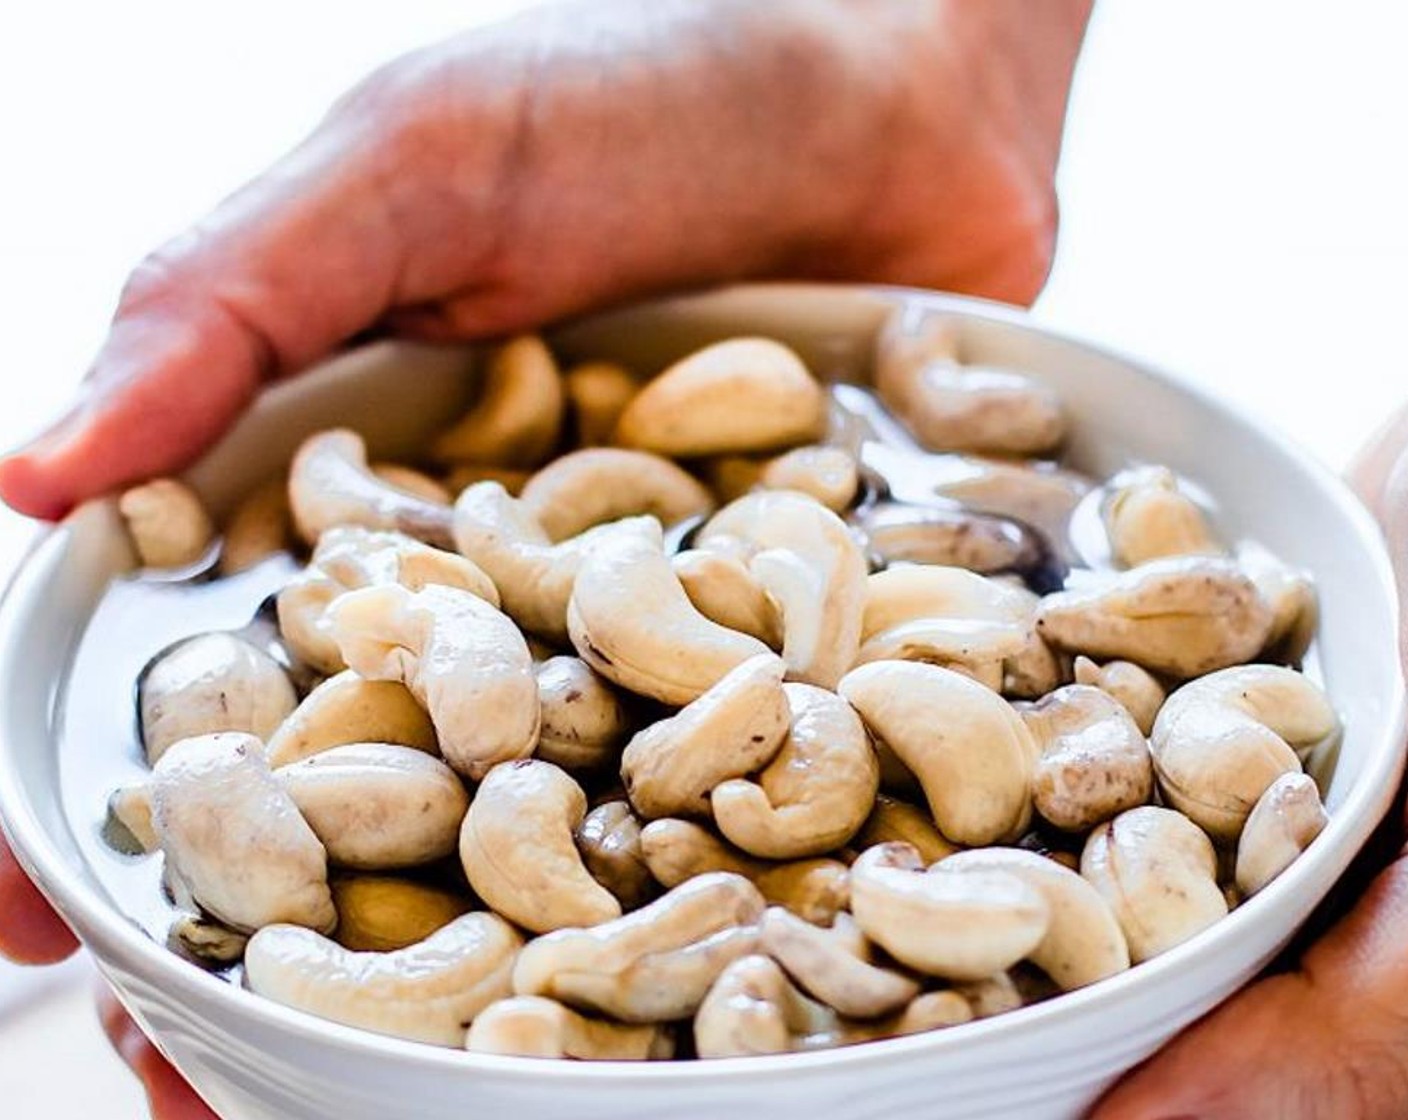 step 1 You will need to soak your Raw Cashews (1 1/4 cups) for at least 2 hrs or up to 24hrs in the purified water.